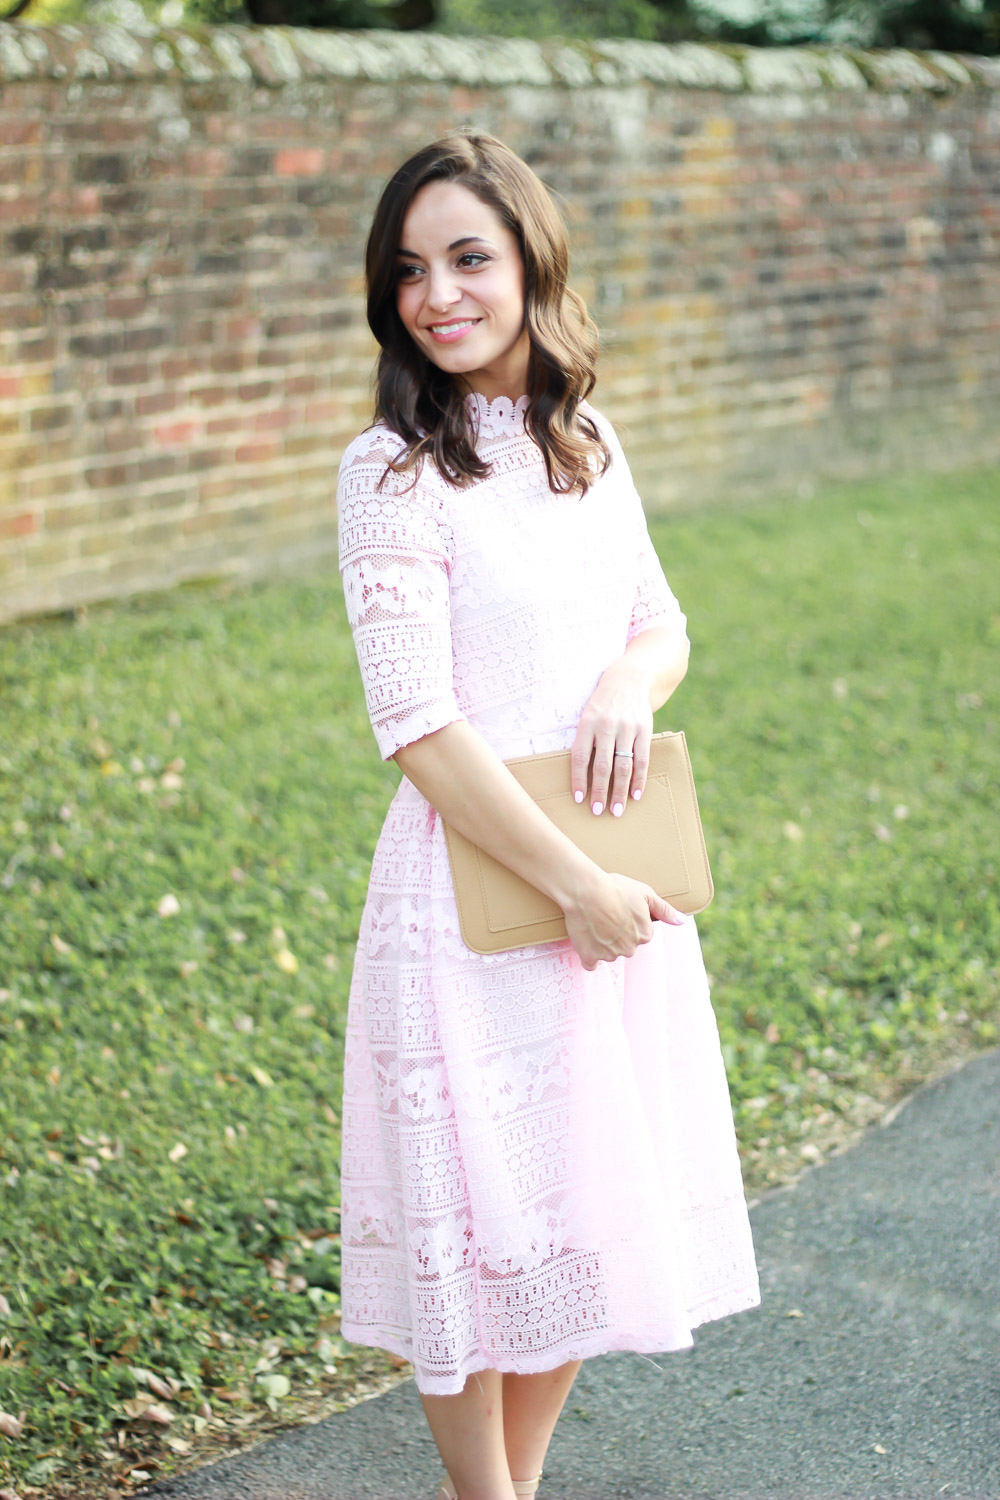 Hello Katie Girl: A Pink Dress for Ada's Birthday Link Up!